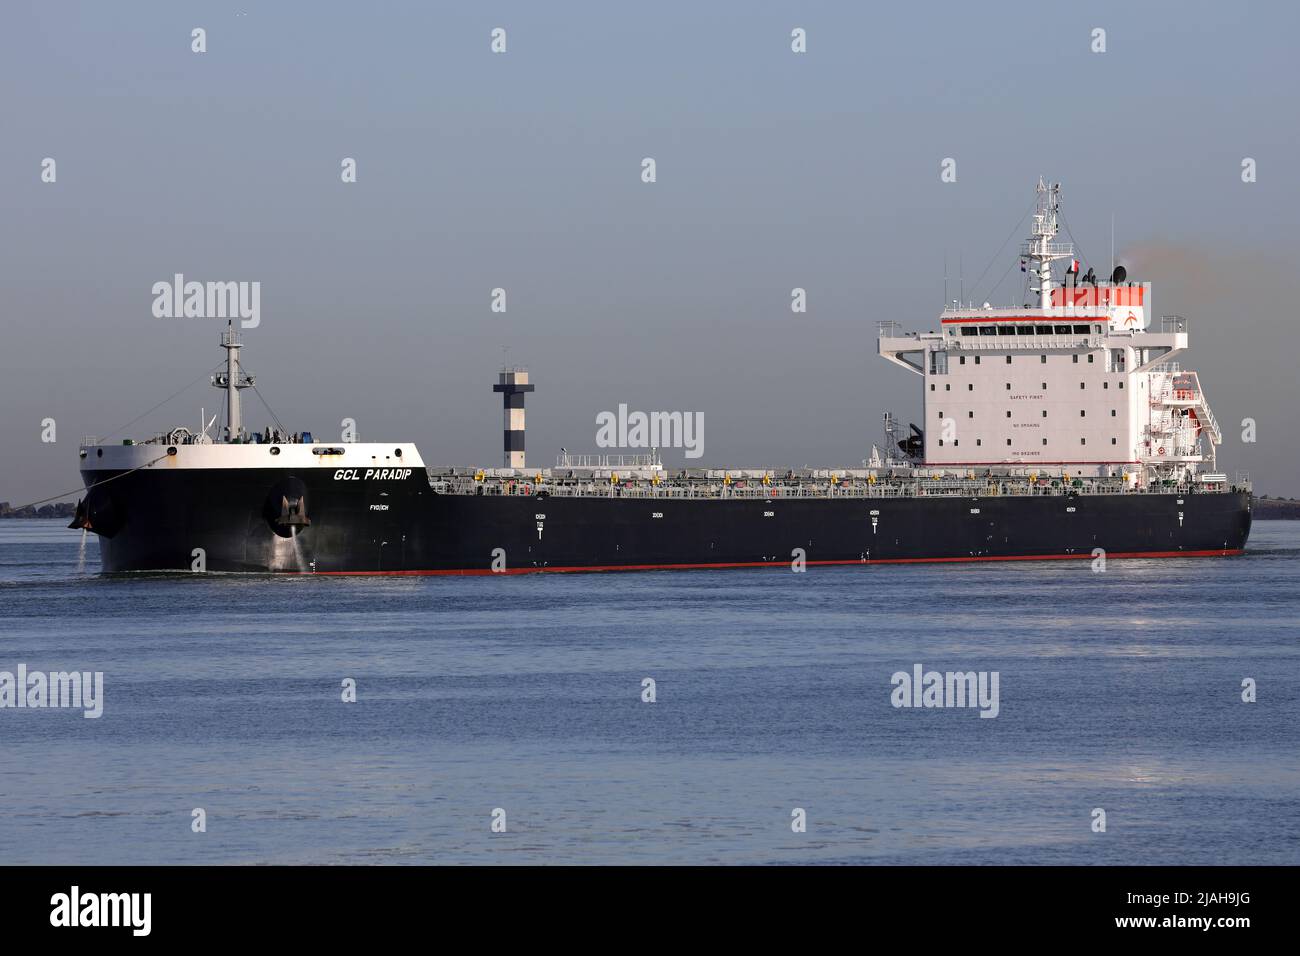 The bulk carrier GCL Paradip arrives in the port of Rotterdam on March 18, 2022. Stock Photo